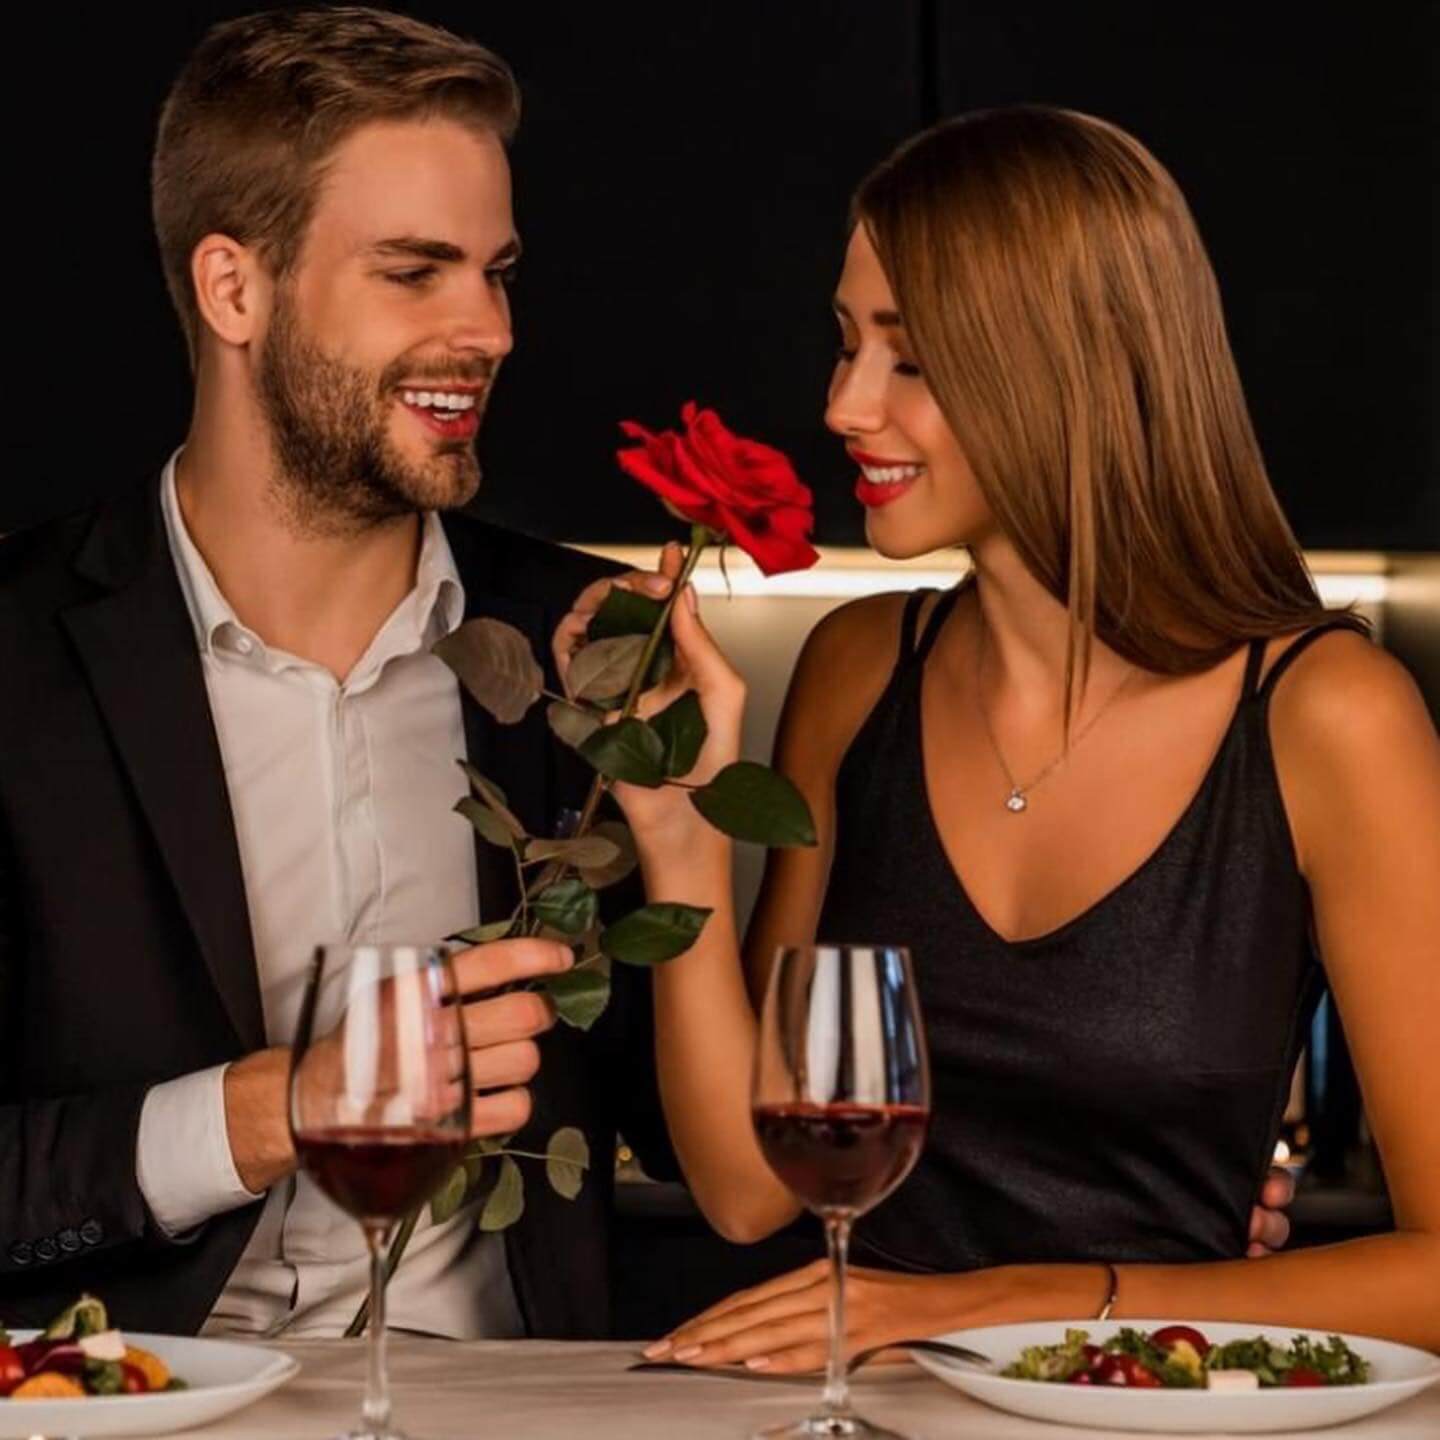 Valentines Meal - Discover Newmarket - Discover Newmarket